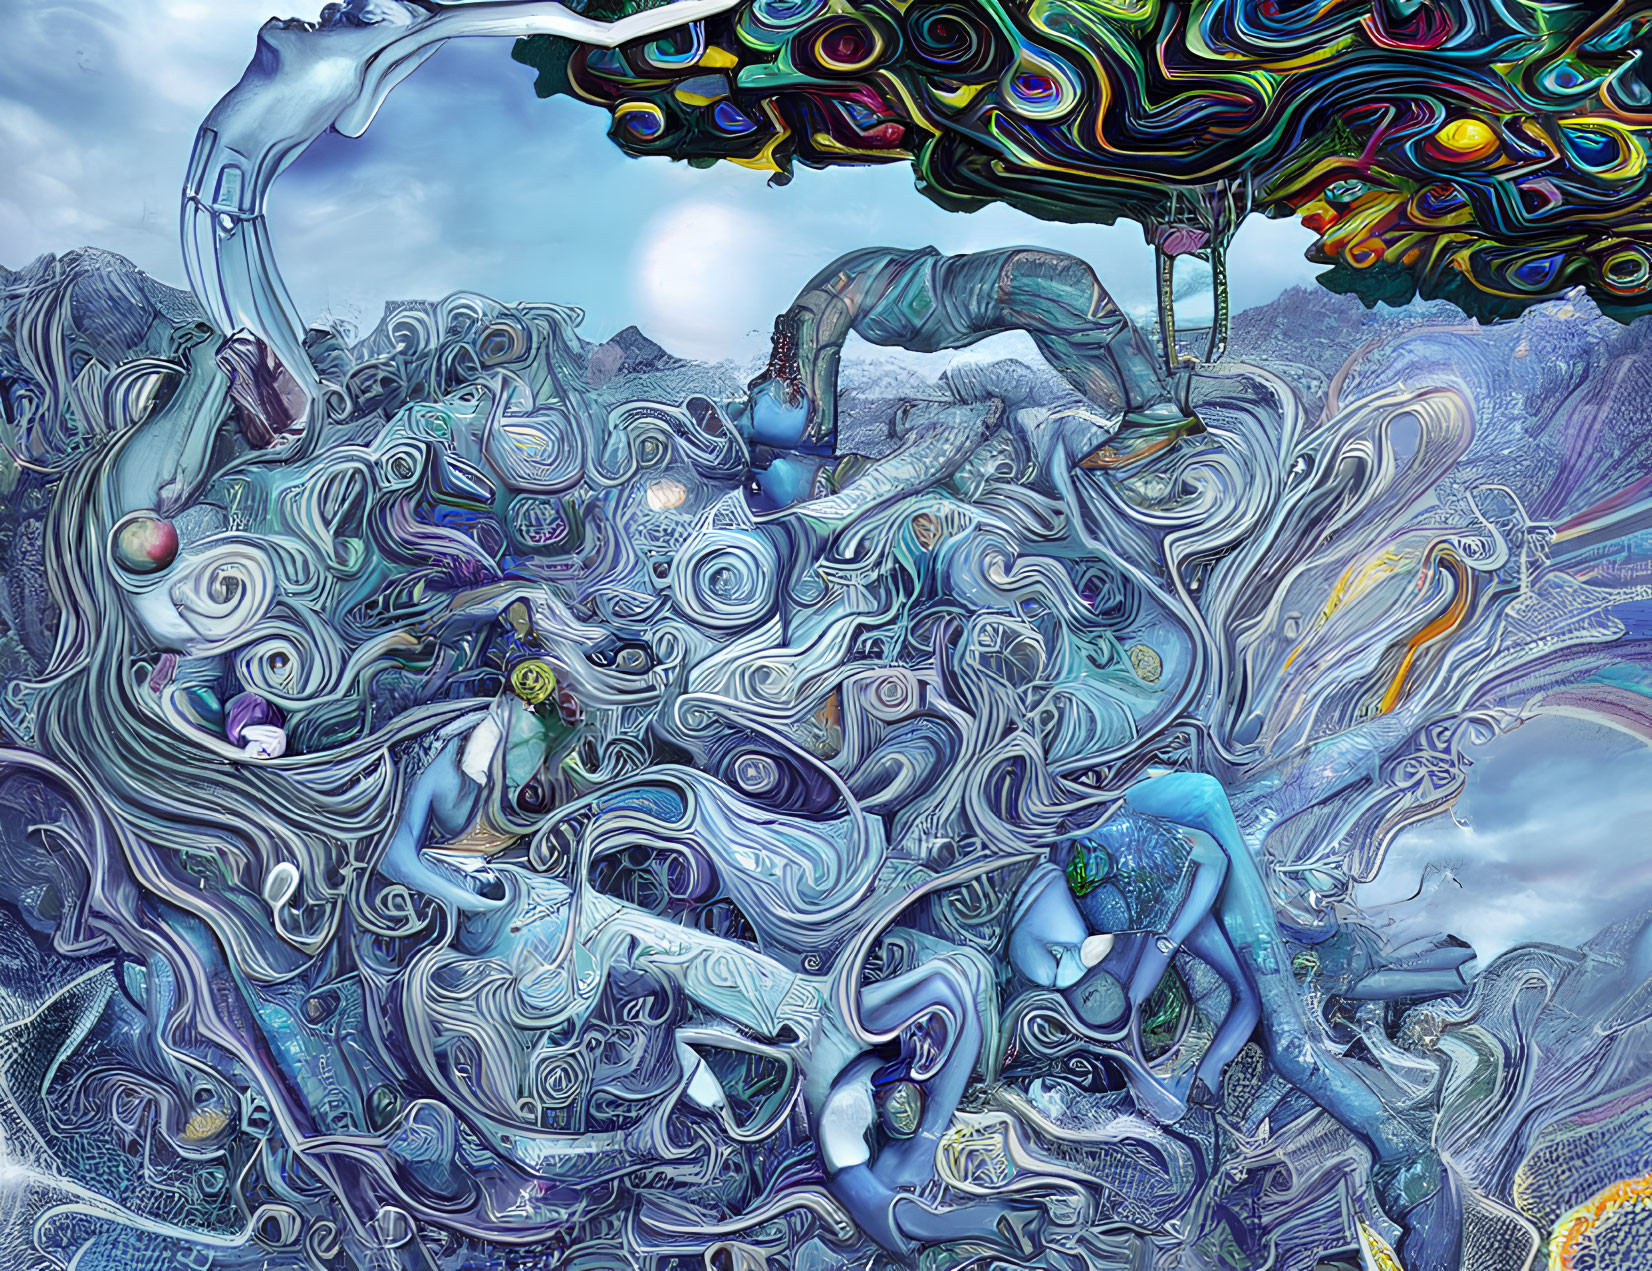 Psychedelic humanoid figures in abstract landscape under colorful sky